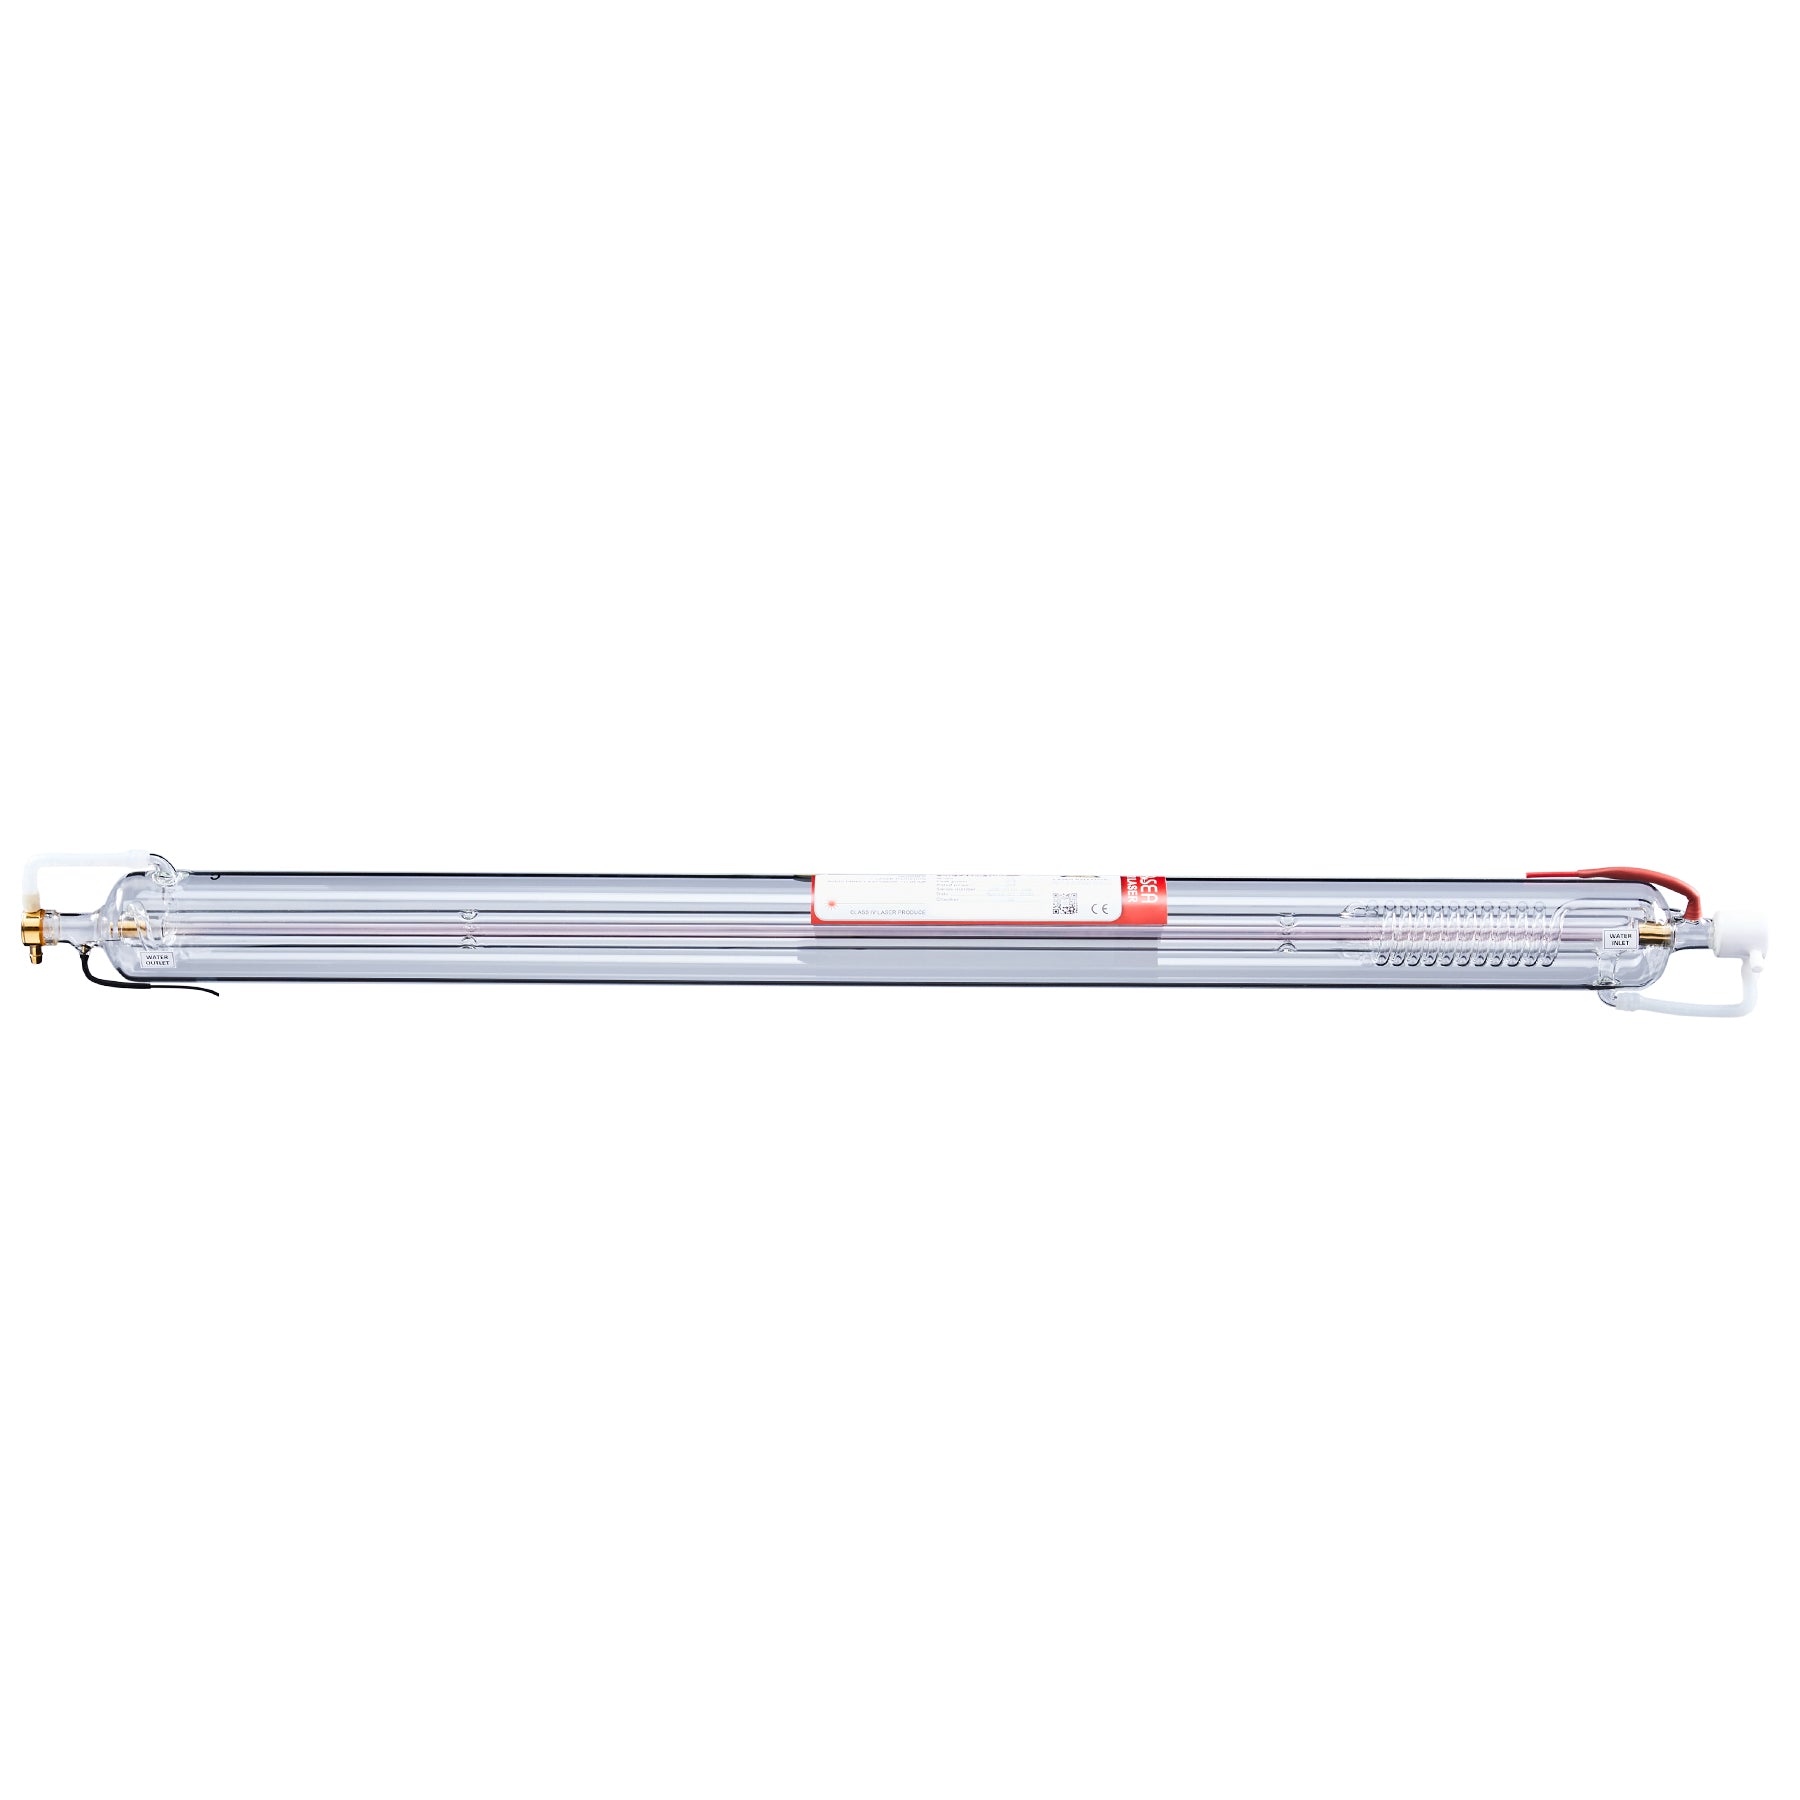 80W CO2 Laser Tube for CO2 Laser Engraver Cutting Machines | 0080